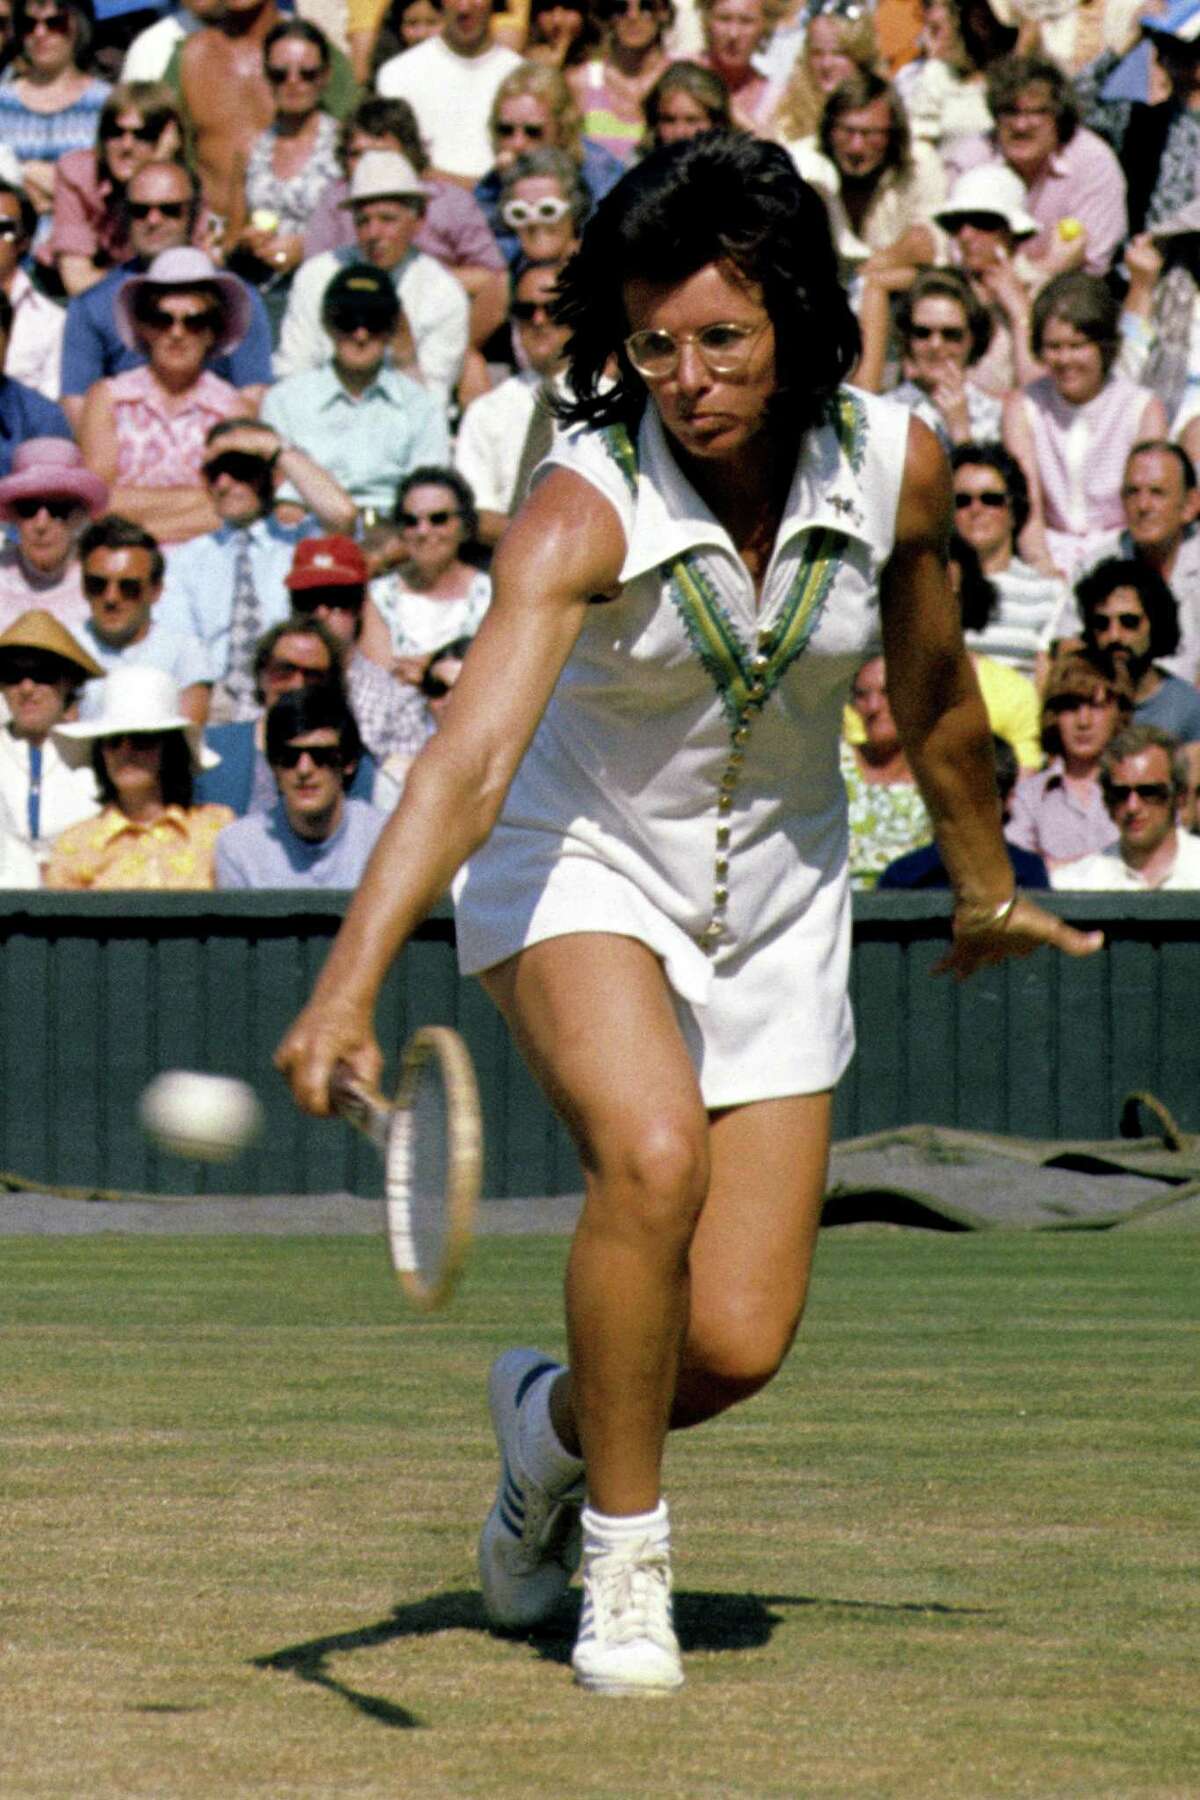 Billie Jean King playing Evonne Goolagong, at Wimbledon in the 1970s.